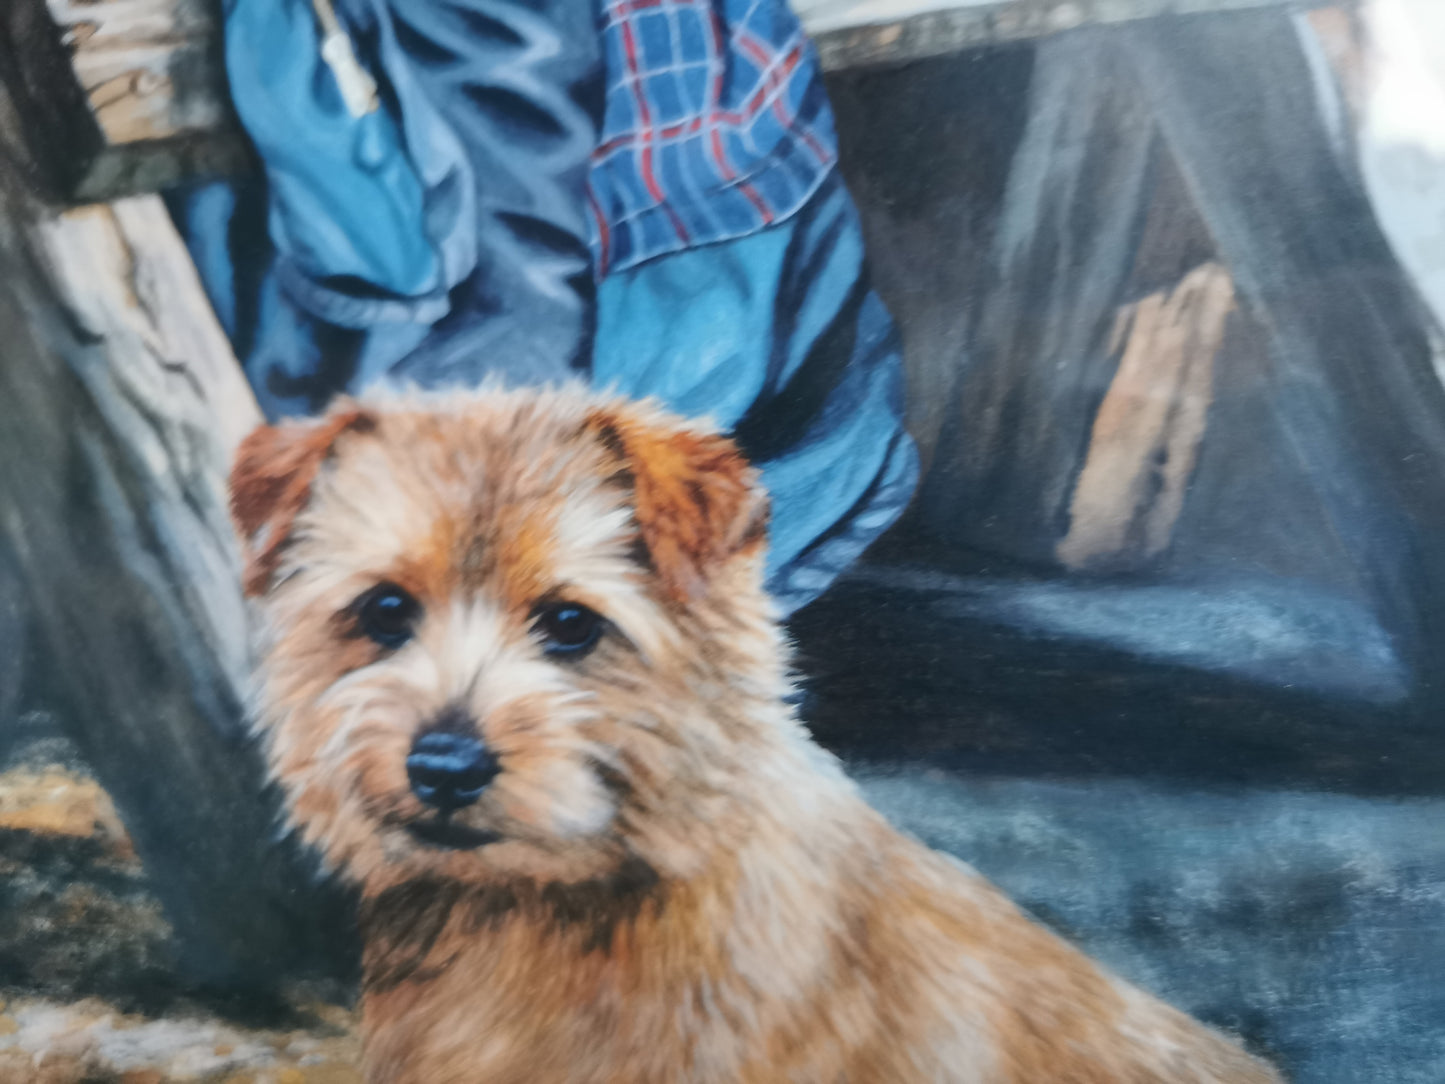 Norfolk Terrier Print Pippa Thew Signed Framed Limited Edition